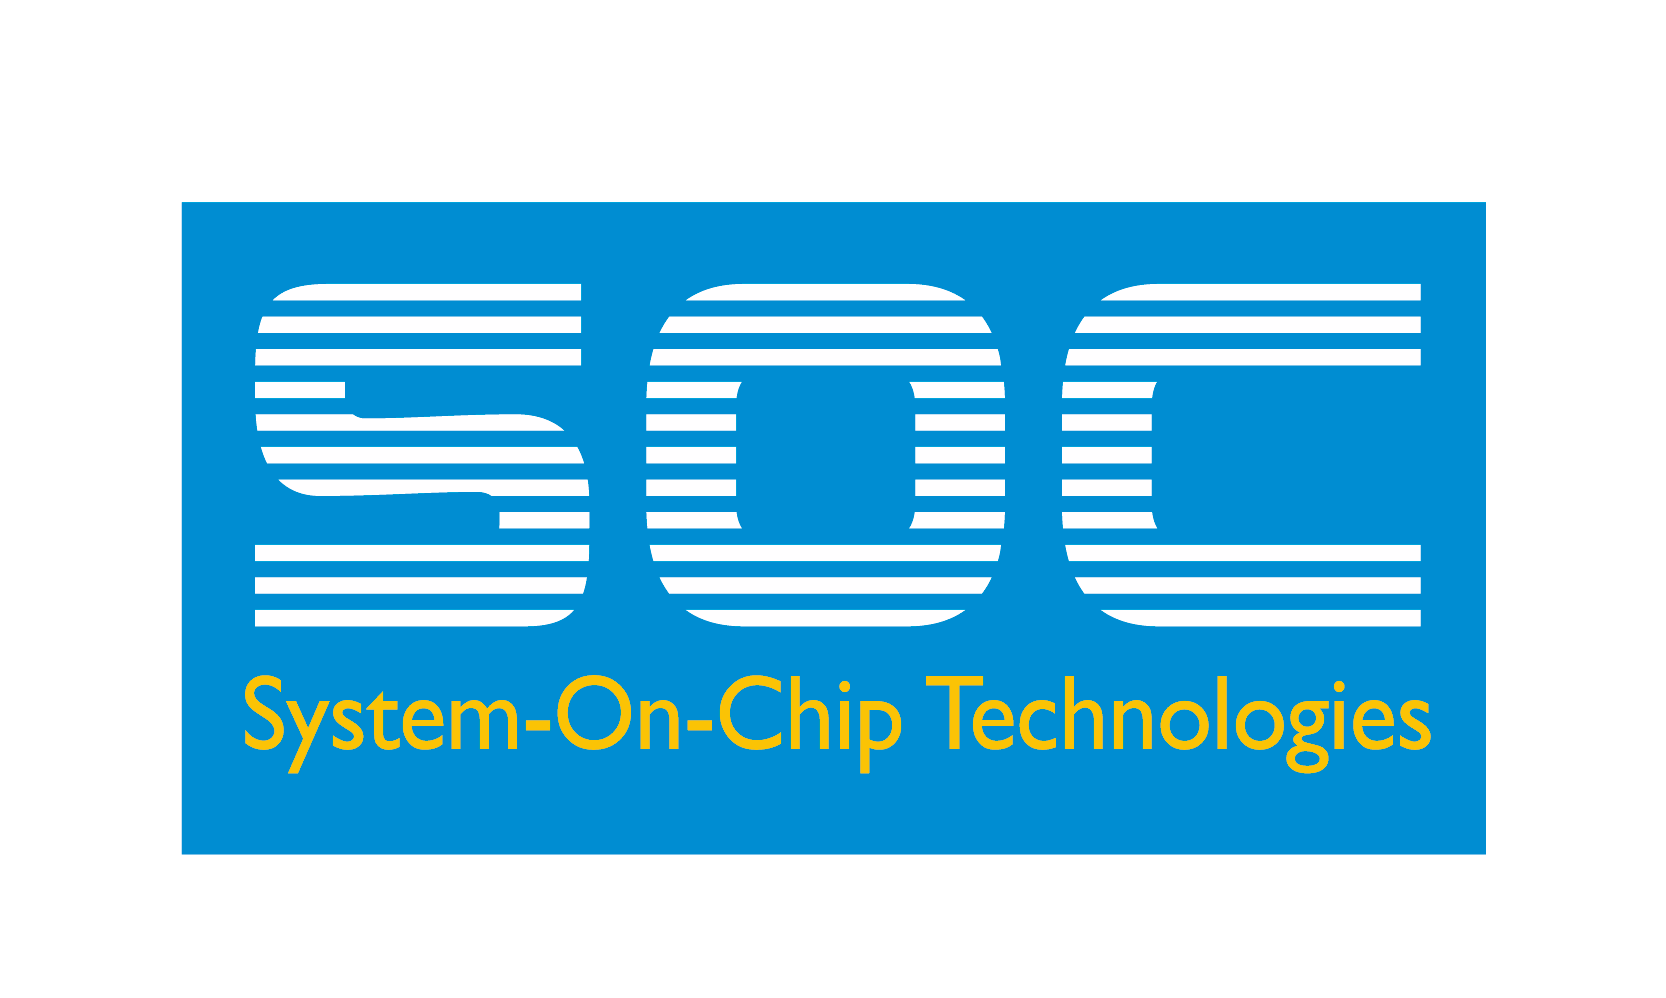 System-On-Chip